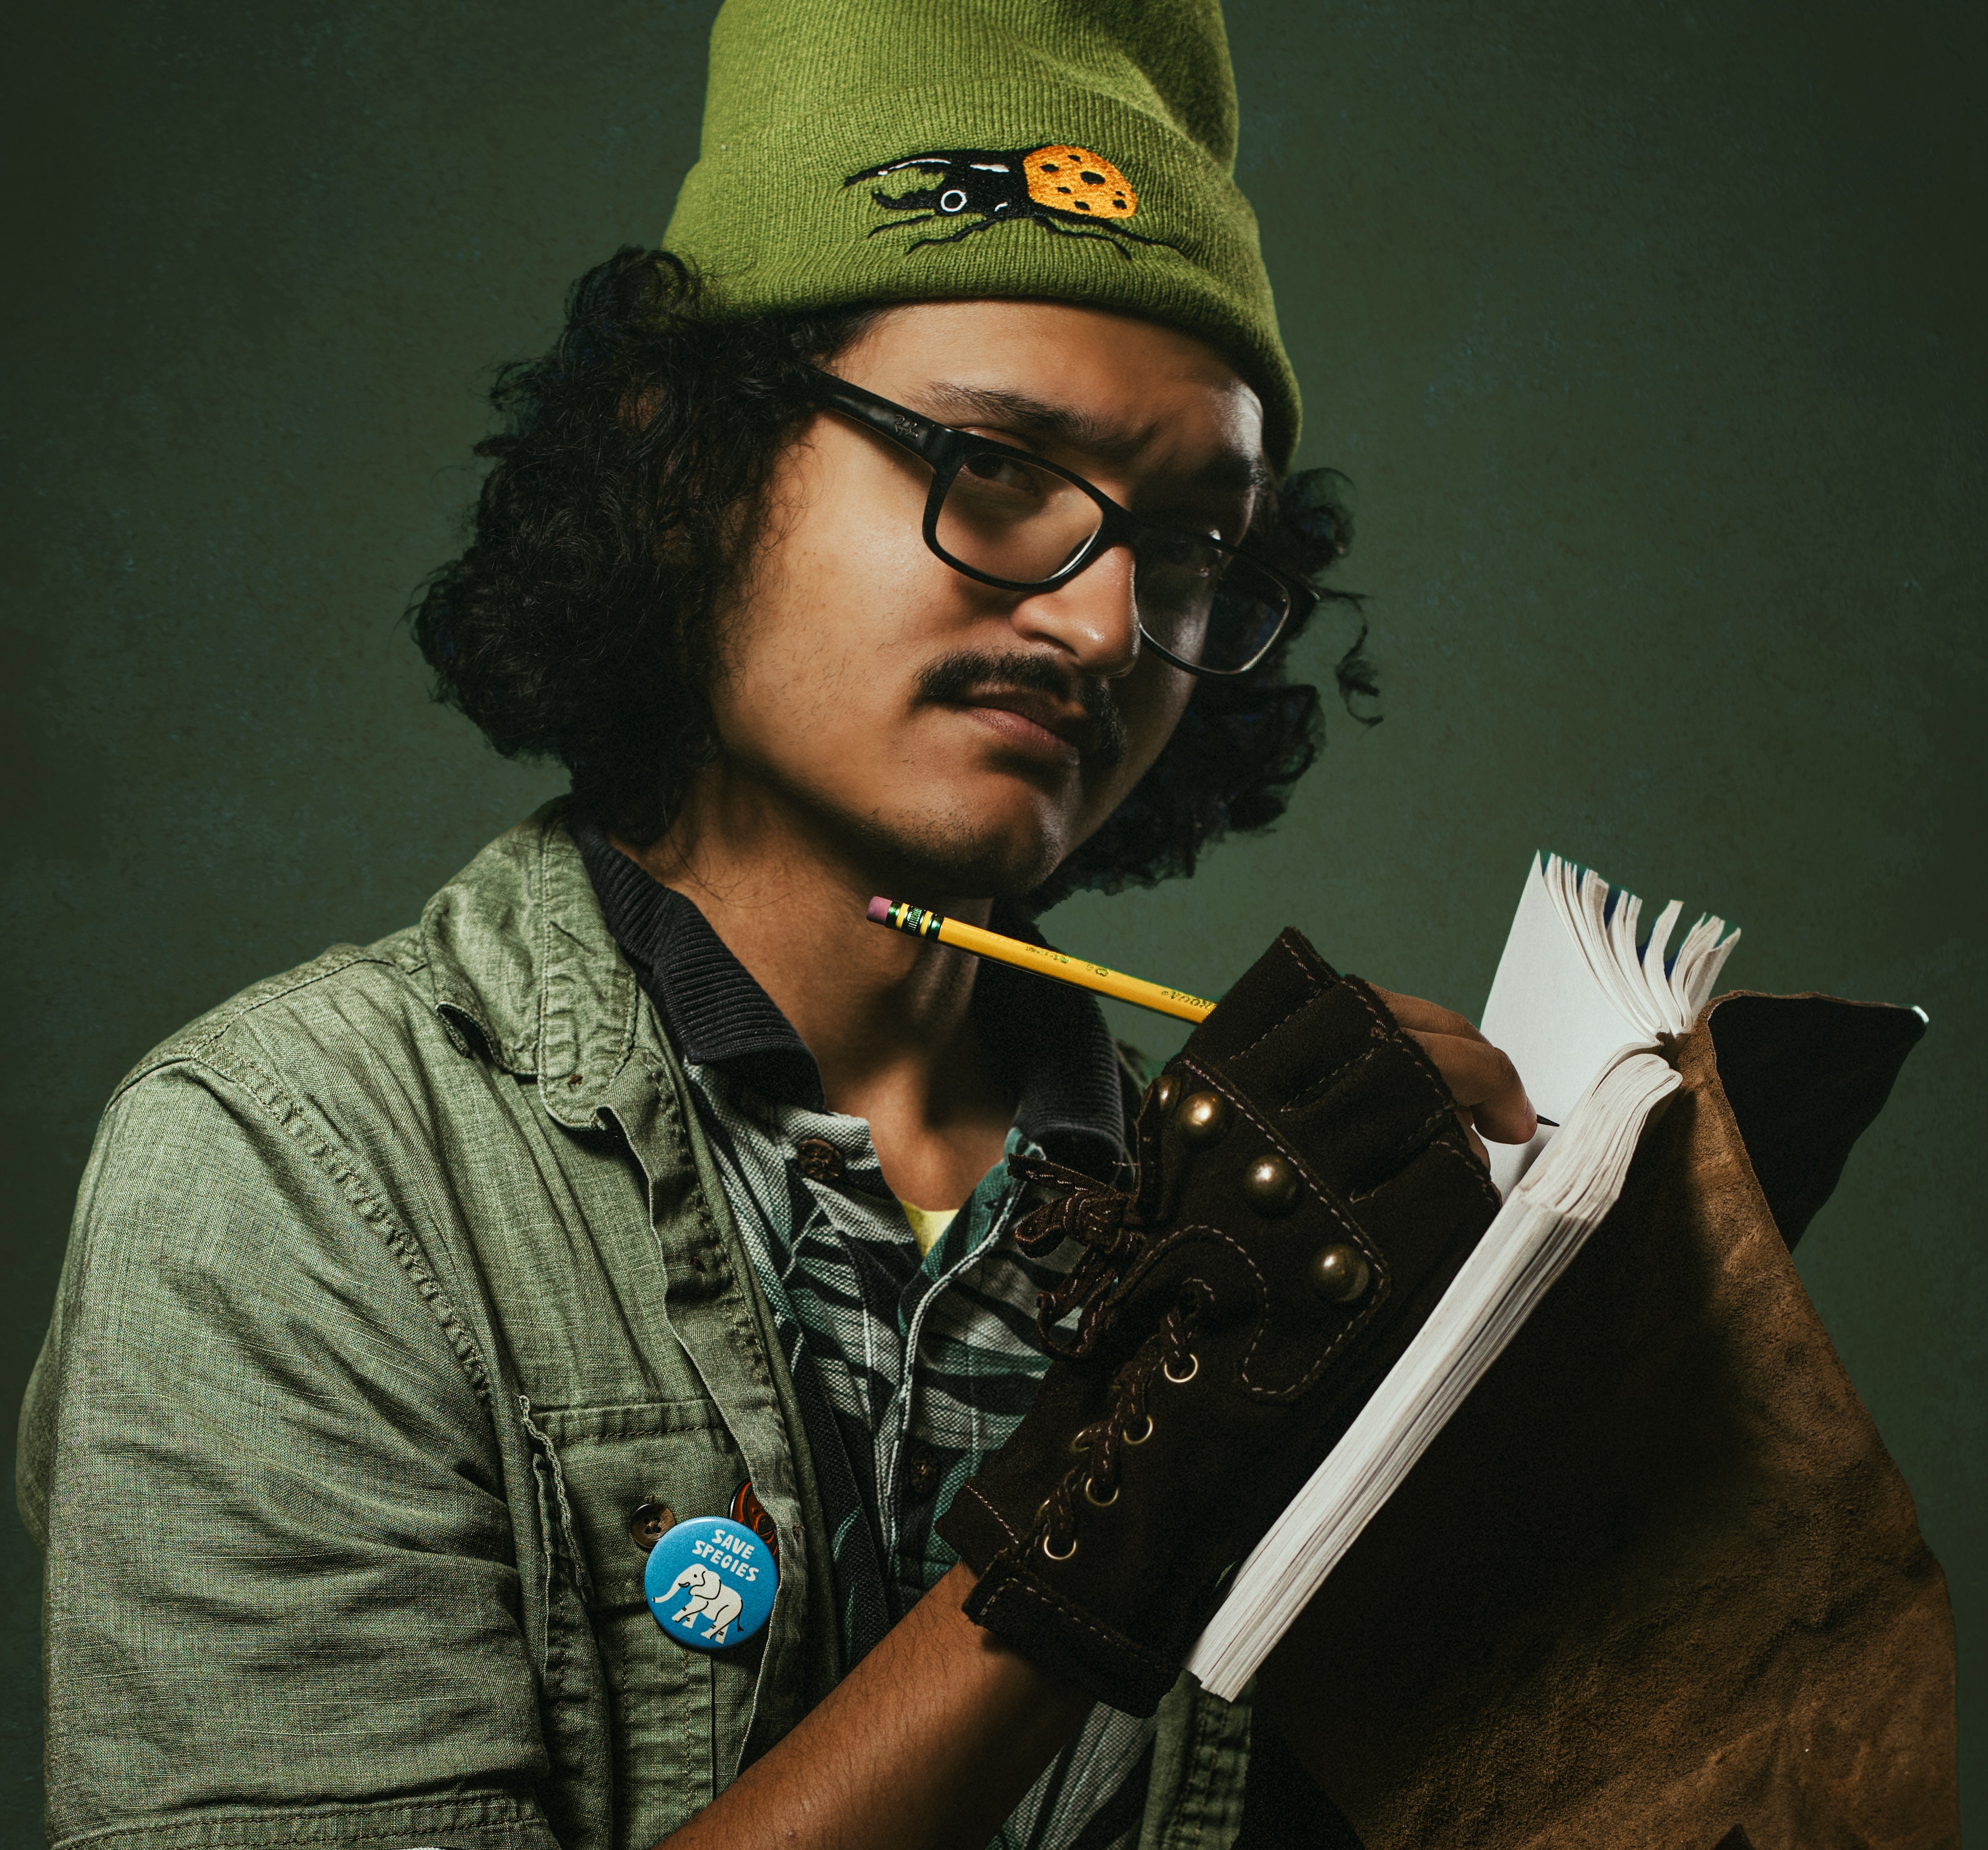 Andrew Rivera, wearing a green toque with a beetle on it, writes in a leather bound notebook